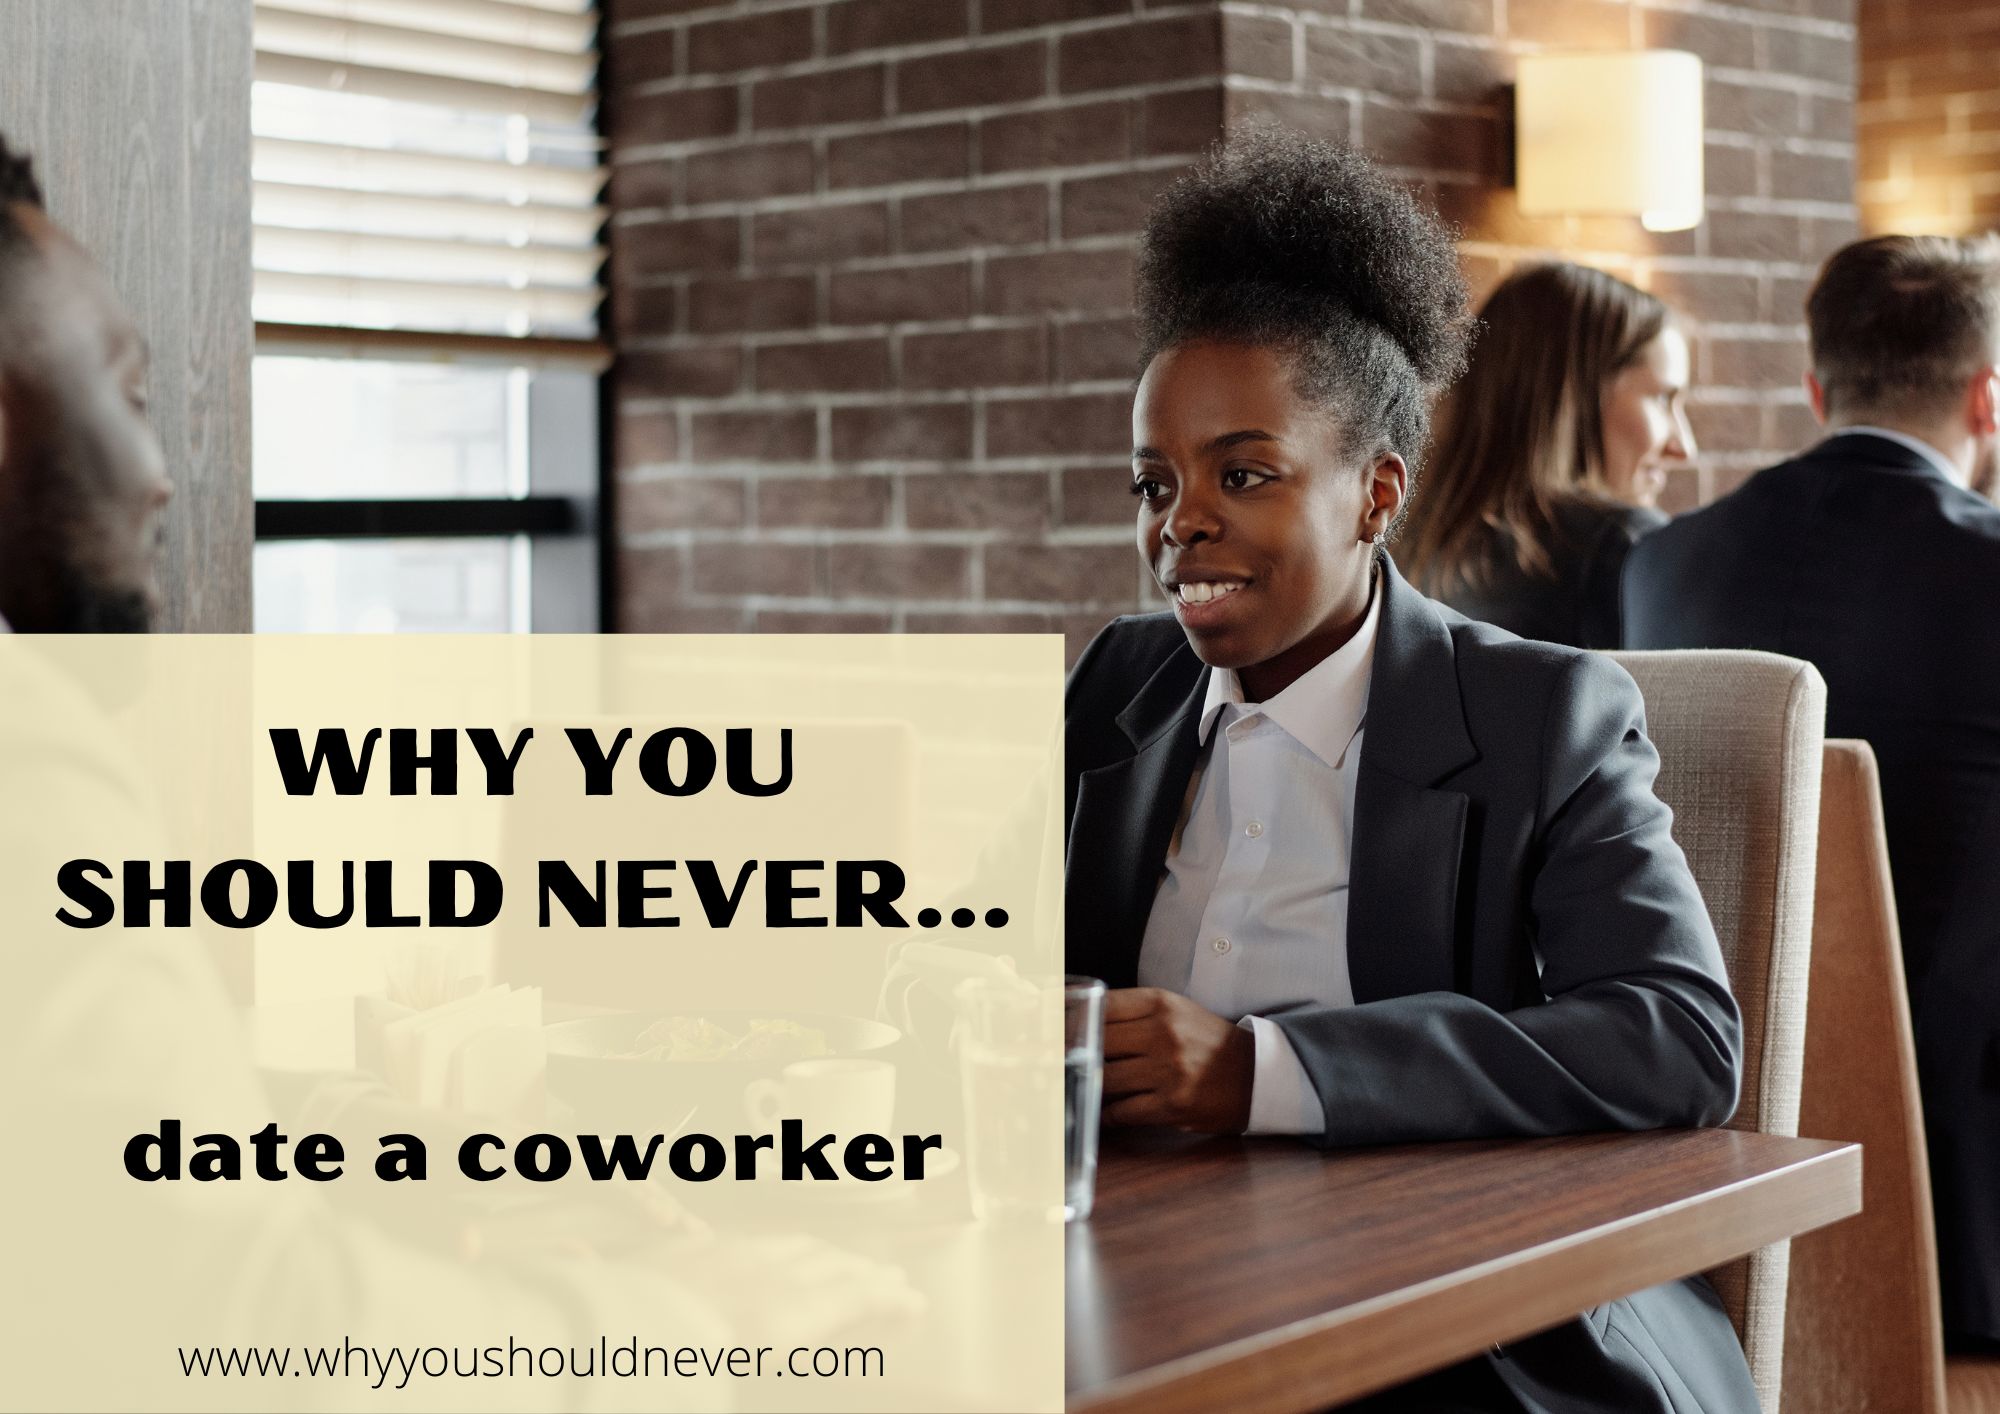 Why You Should Never Date Your Coworker